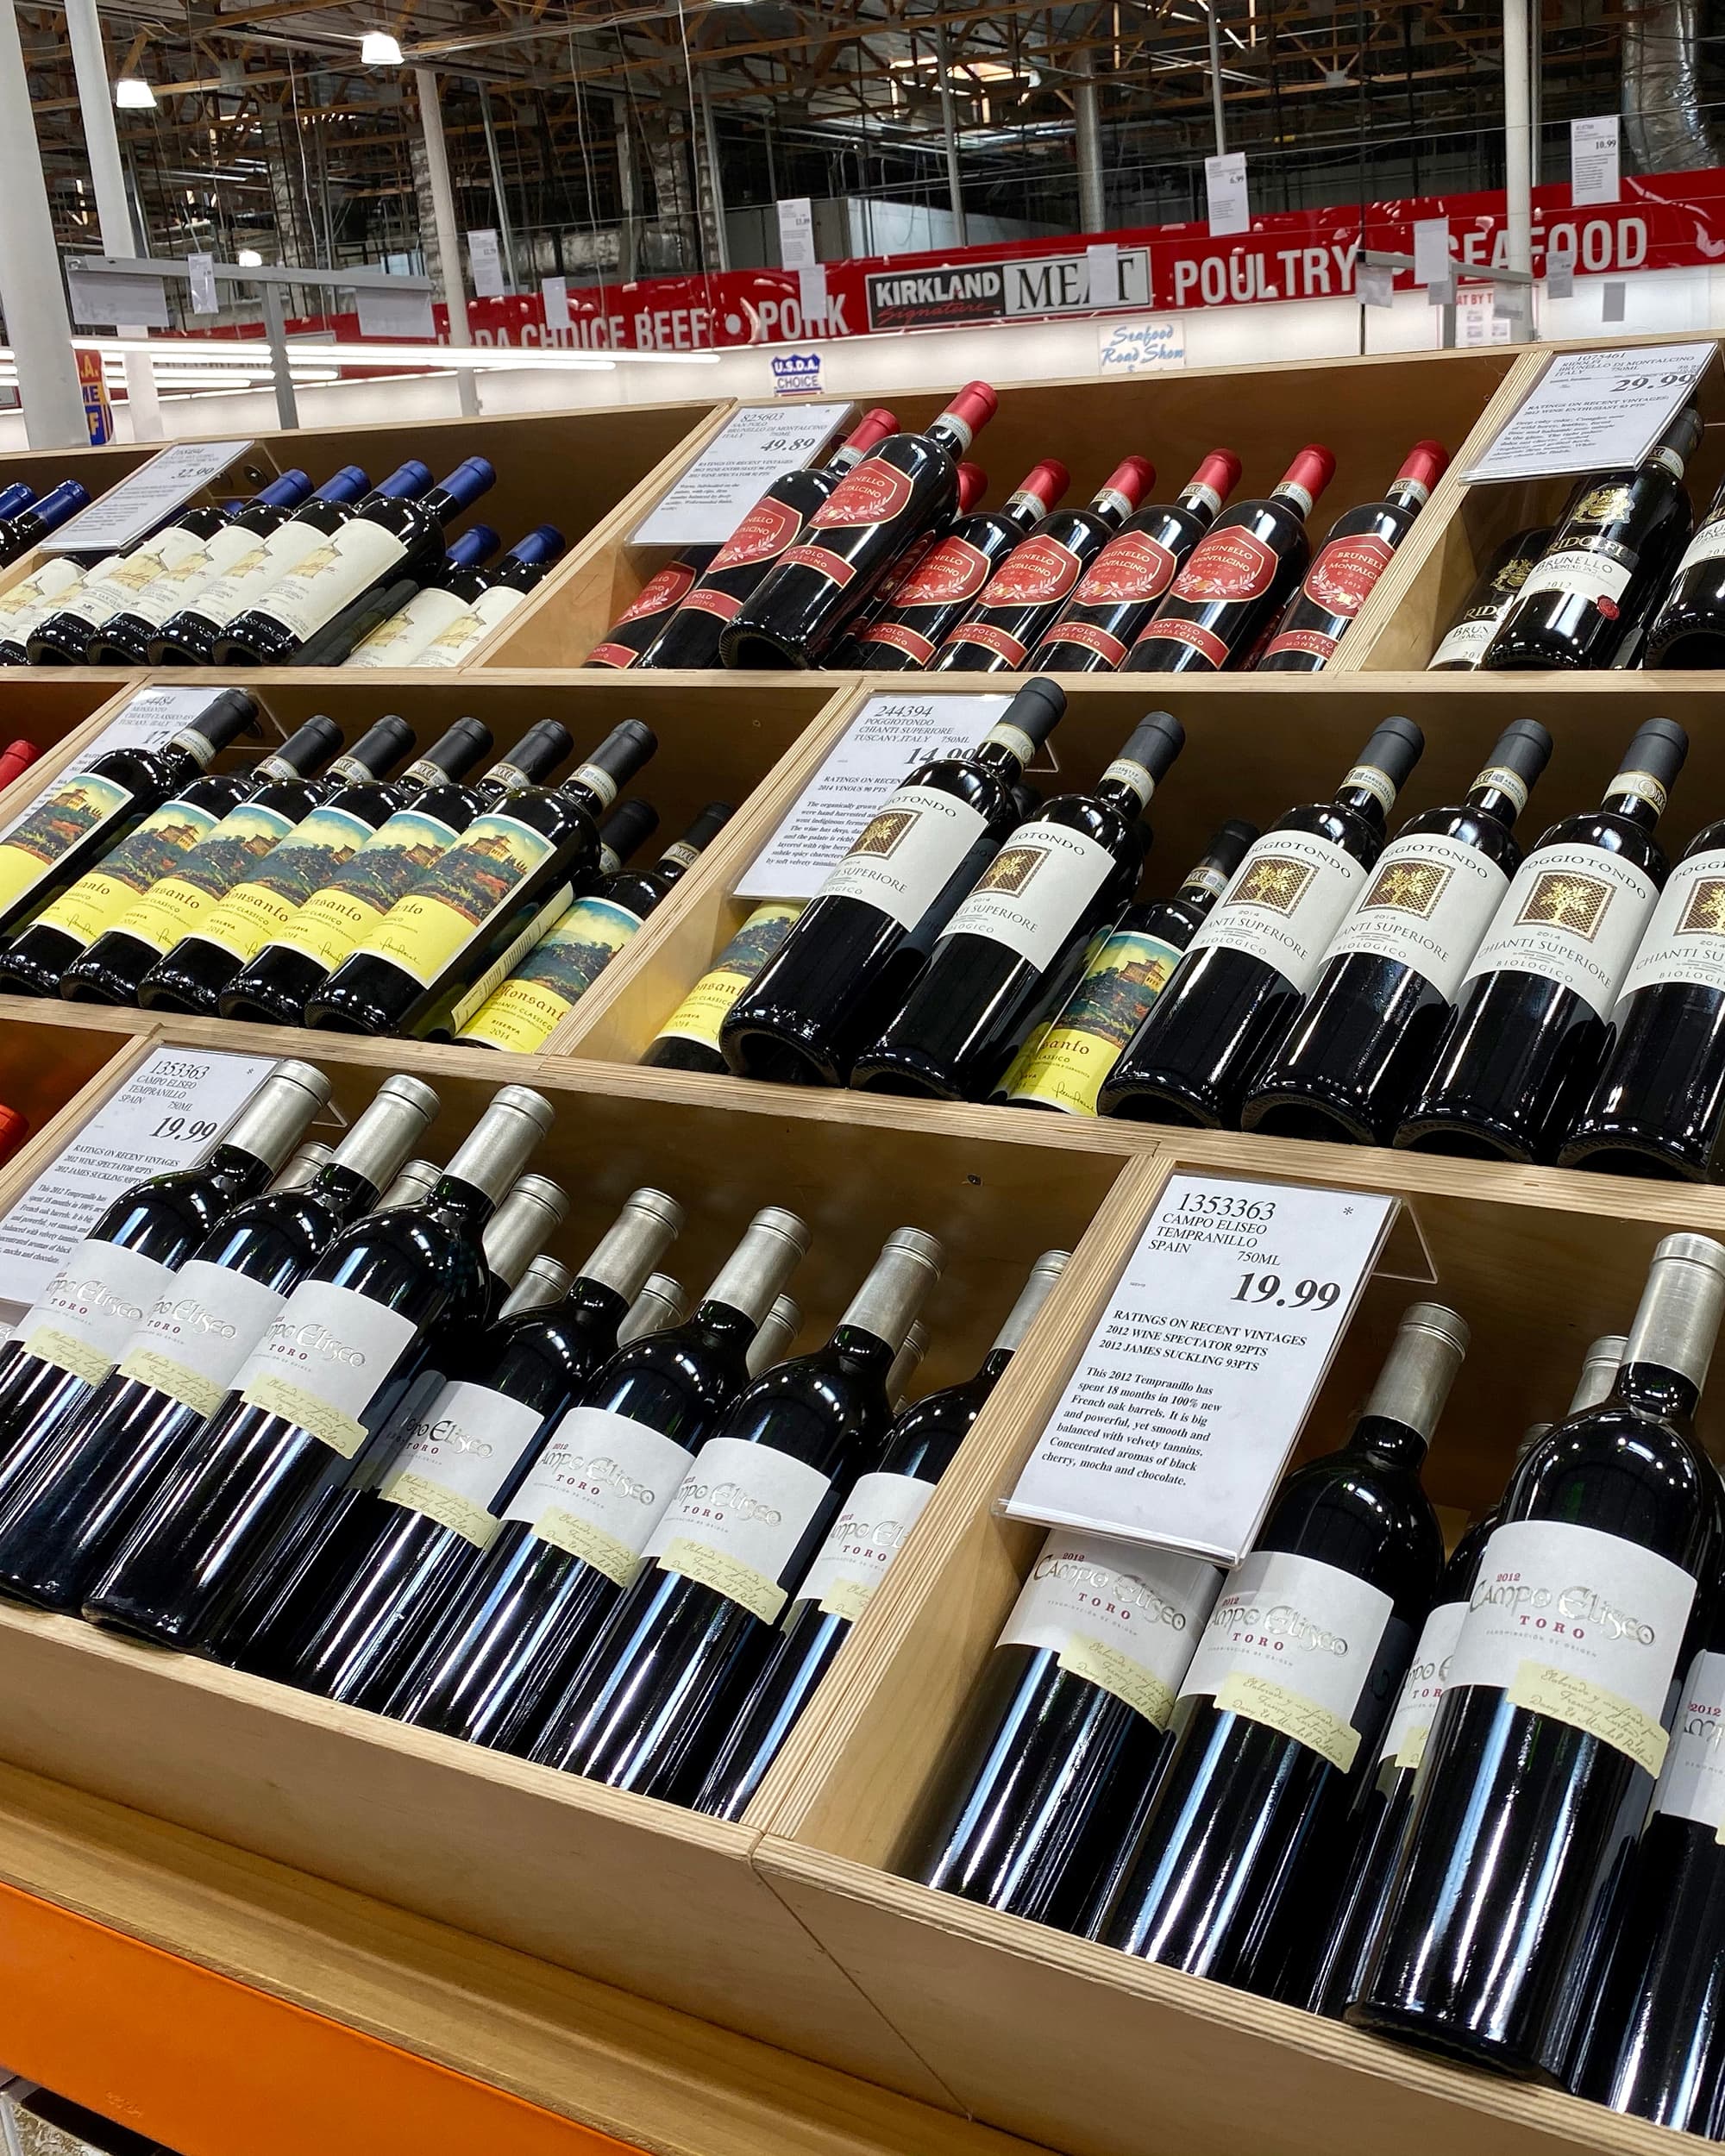 The Best Bubbly Wines At Costco for New Year's - Plus How To